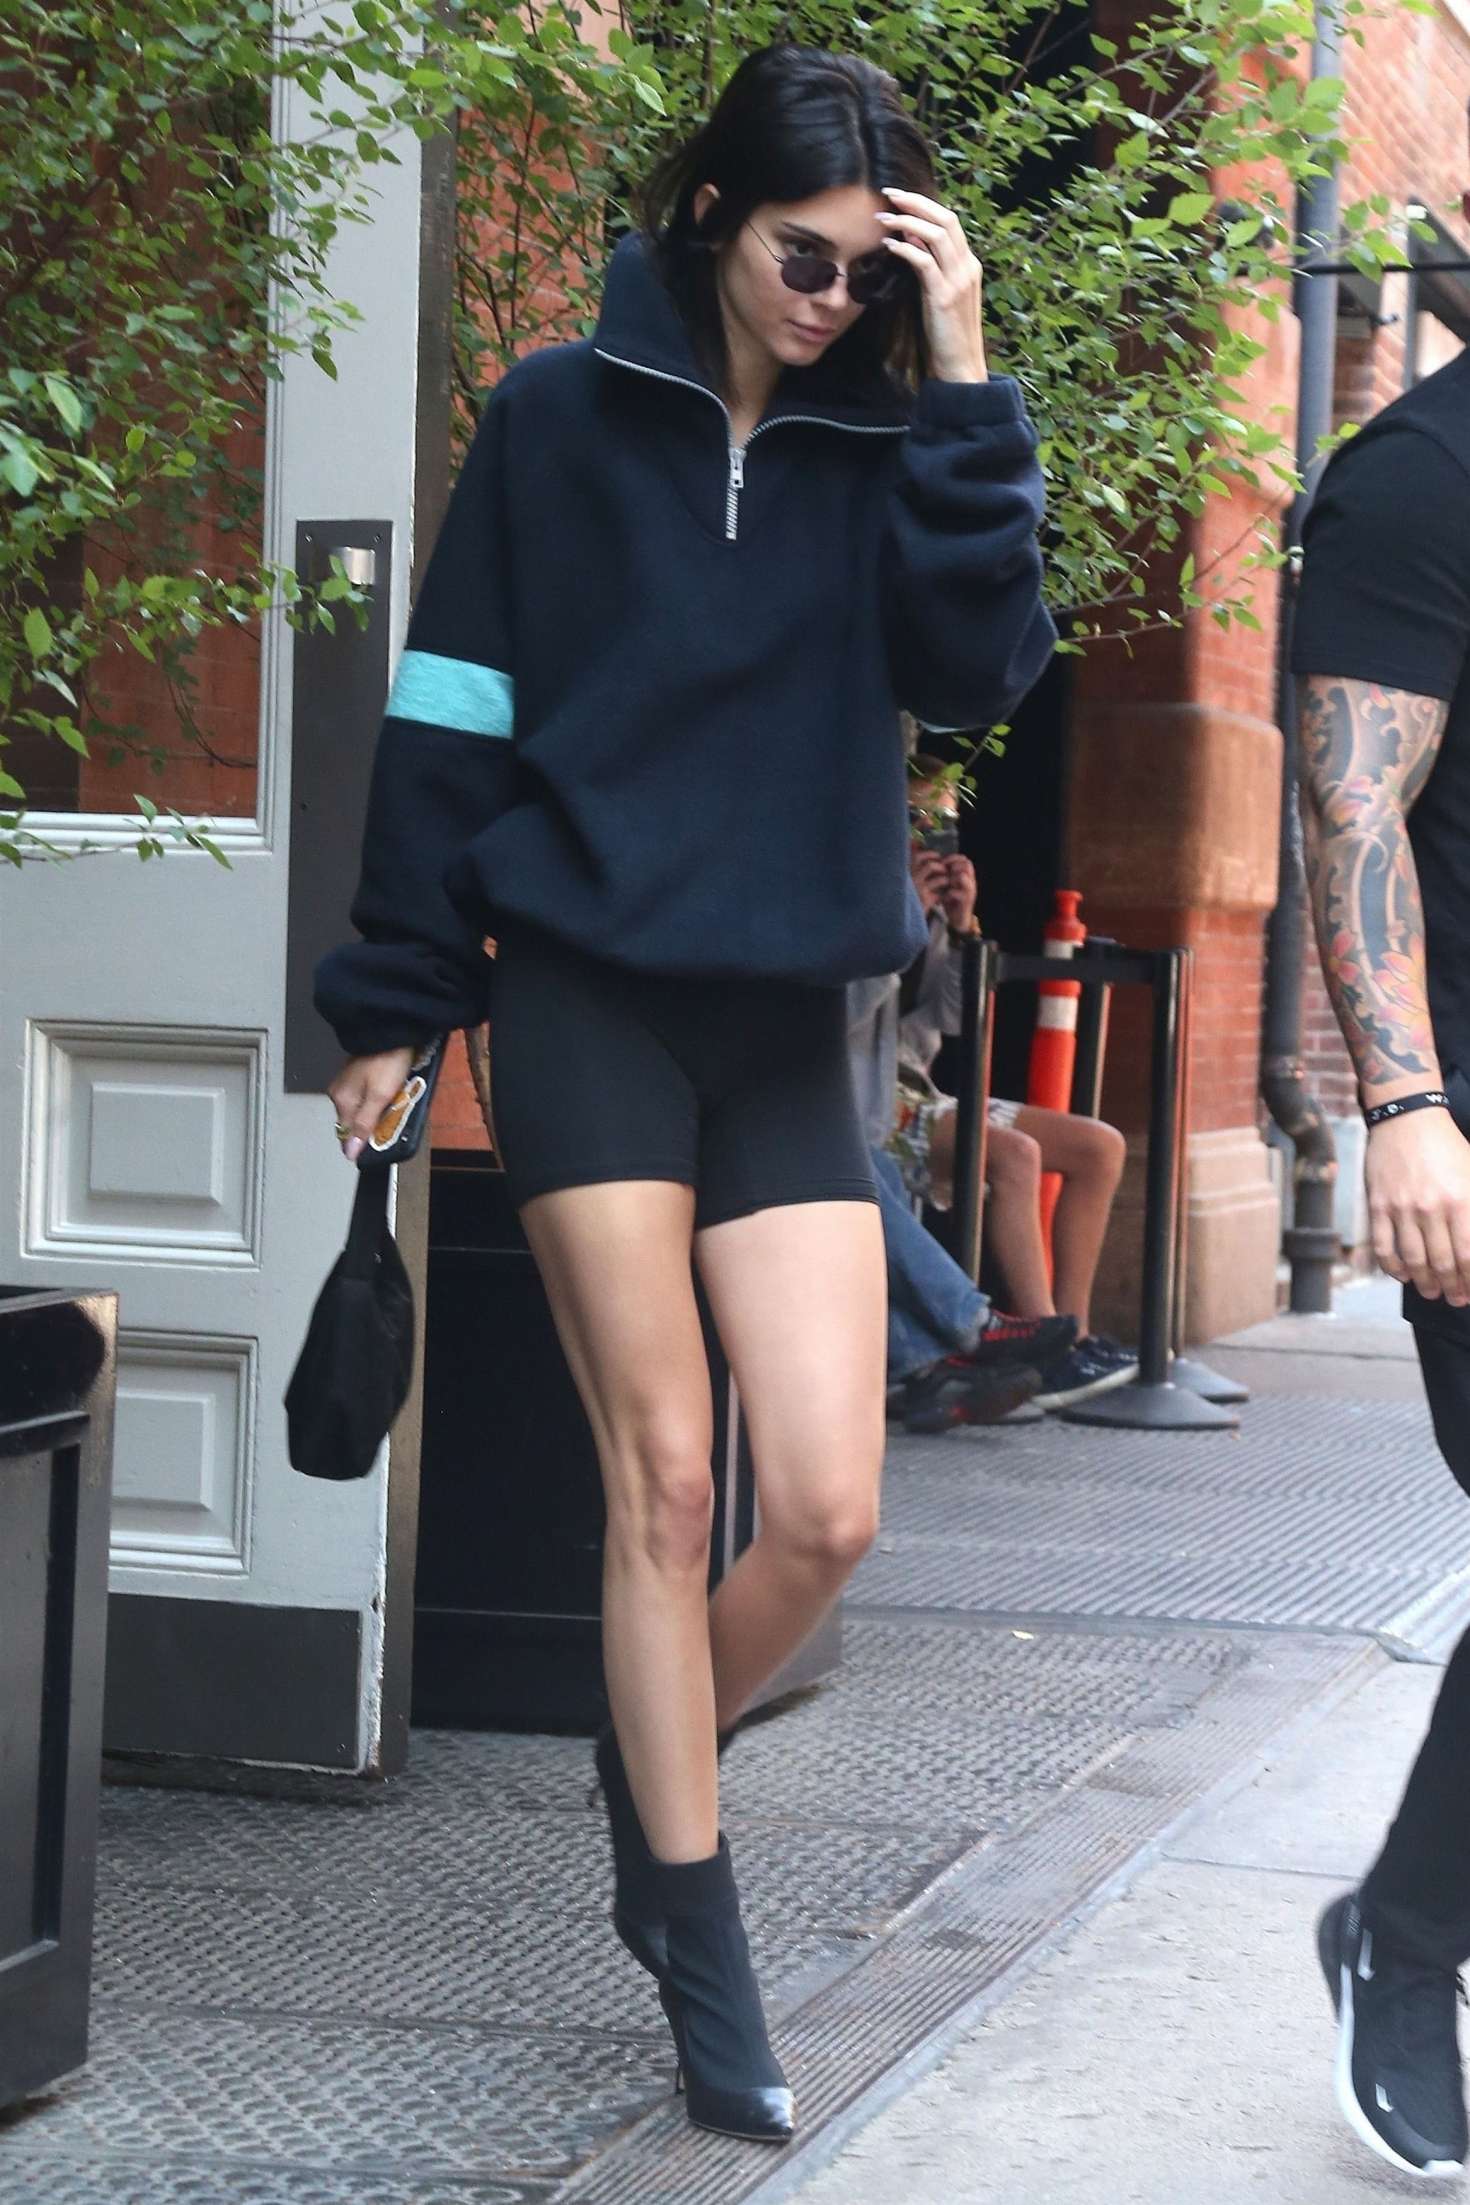 Kendall Jenner in compression shorts out in New York City